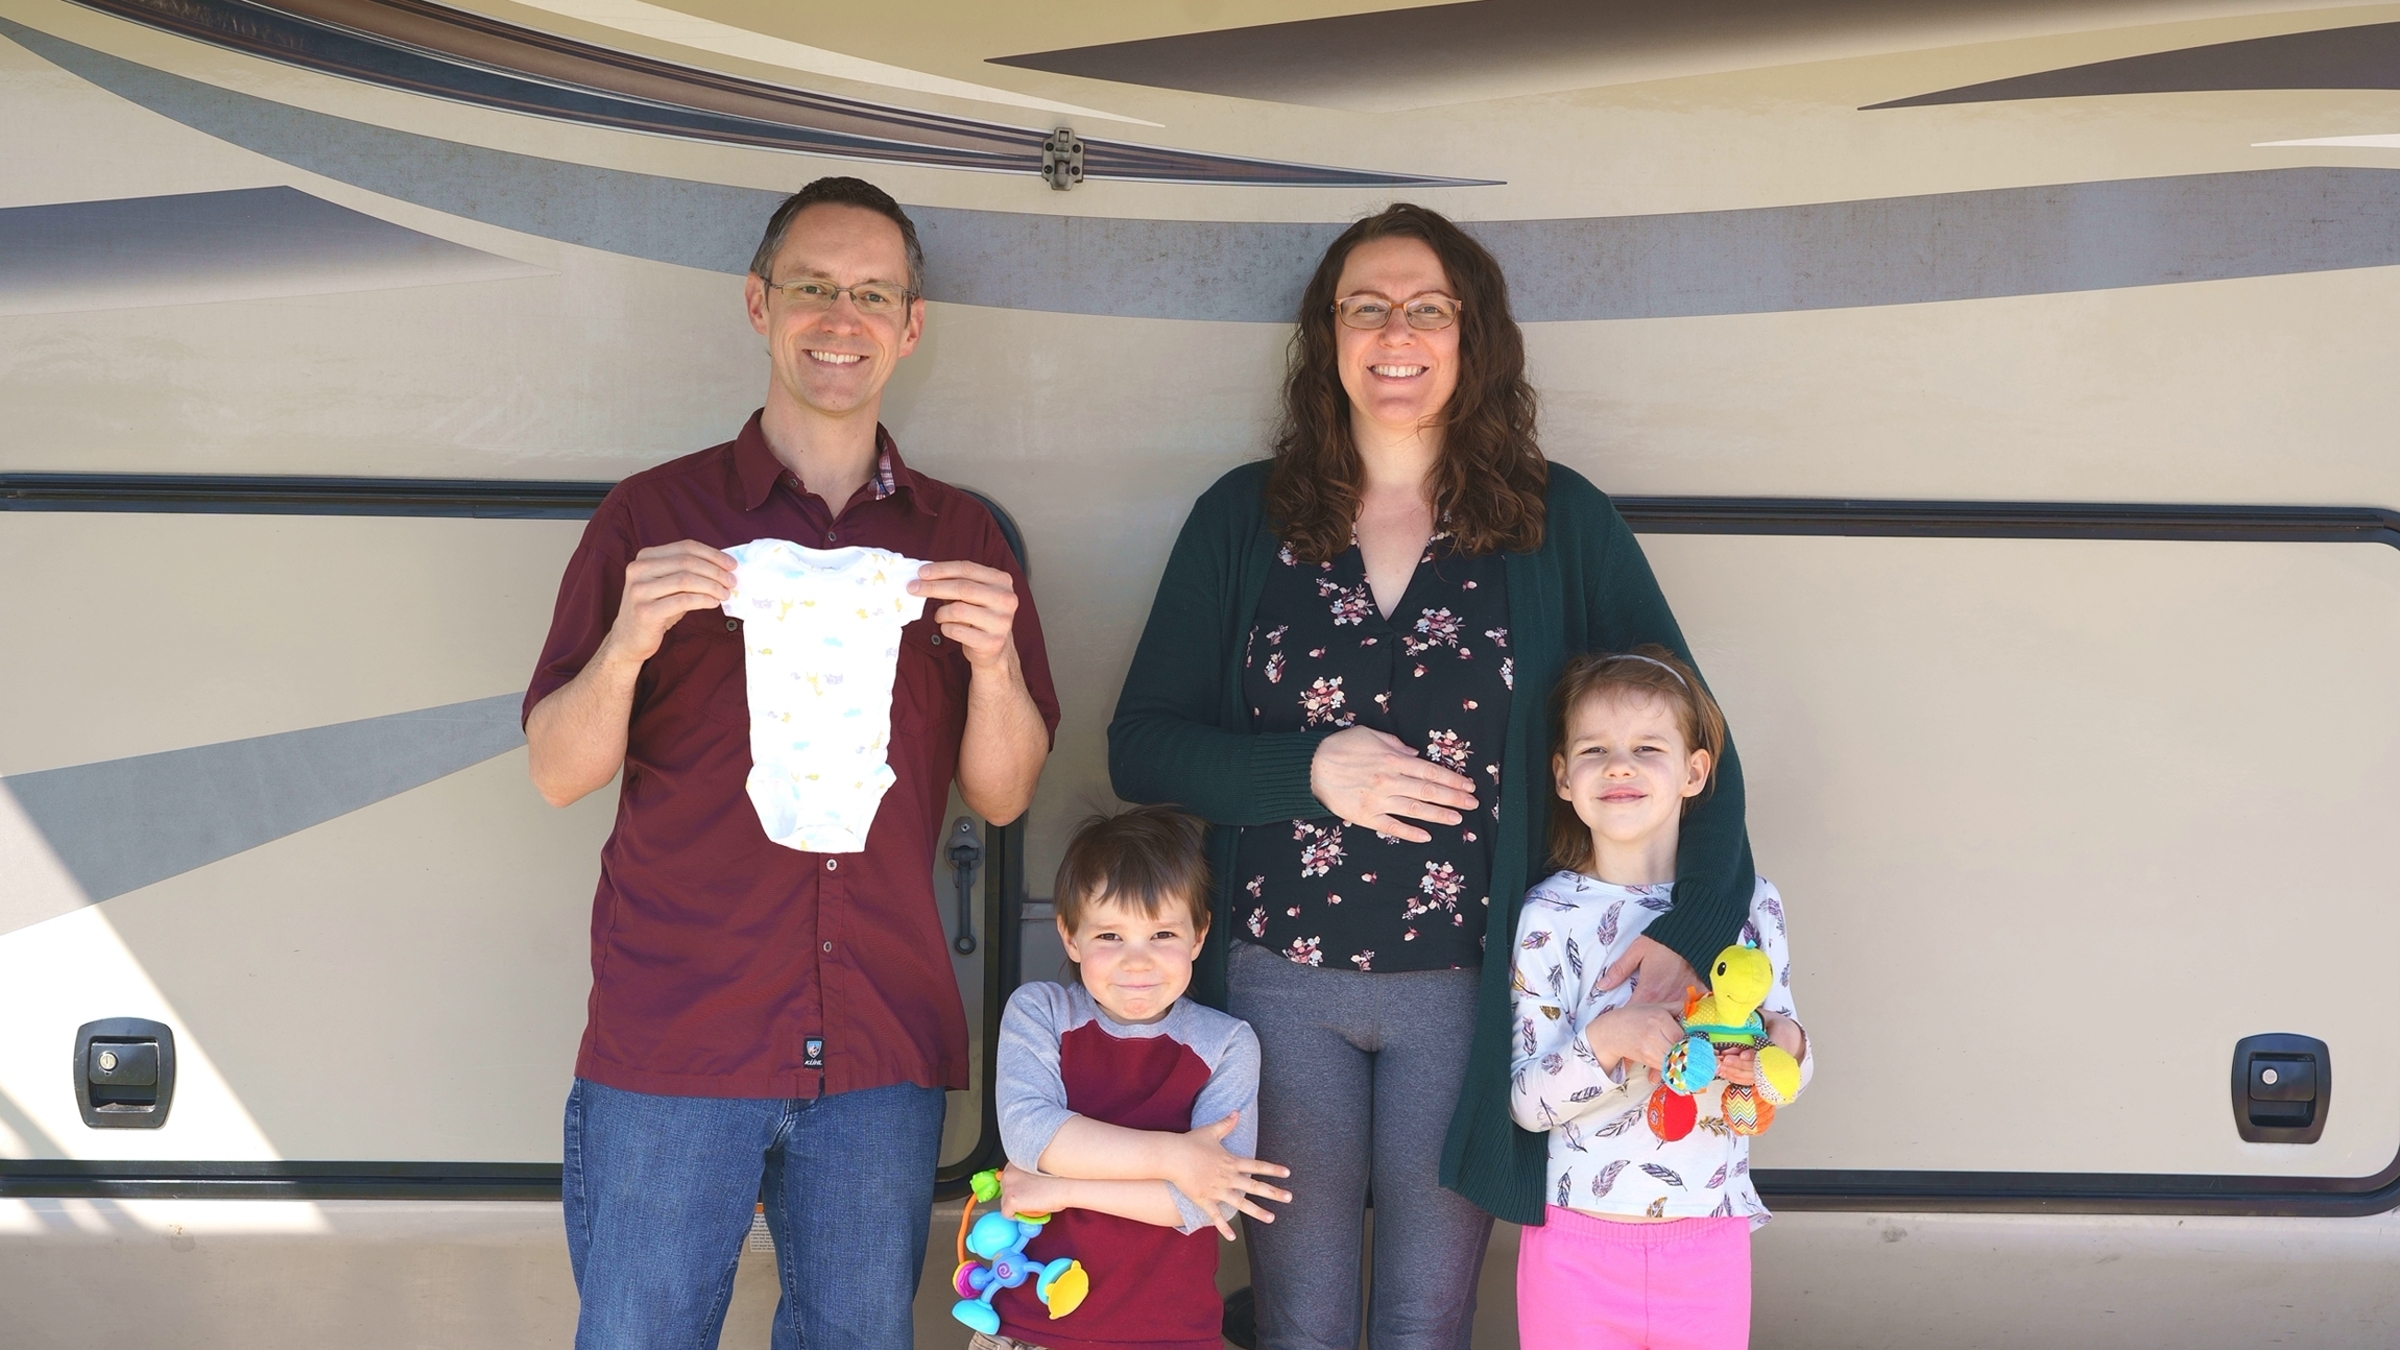 Family expecting new baby while RVing